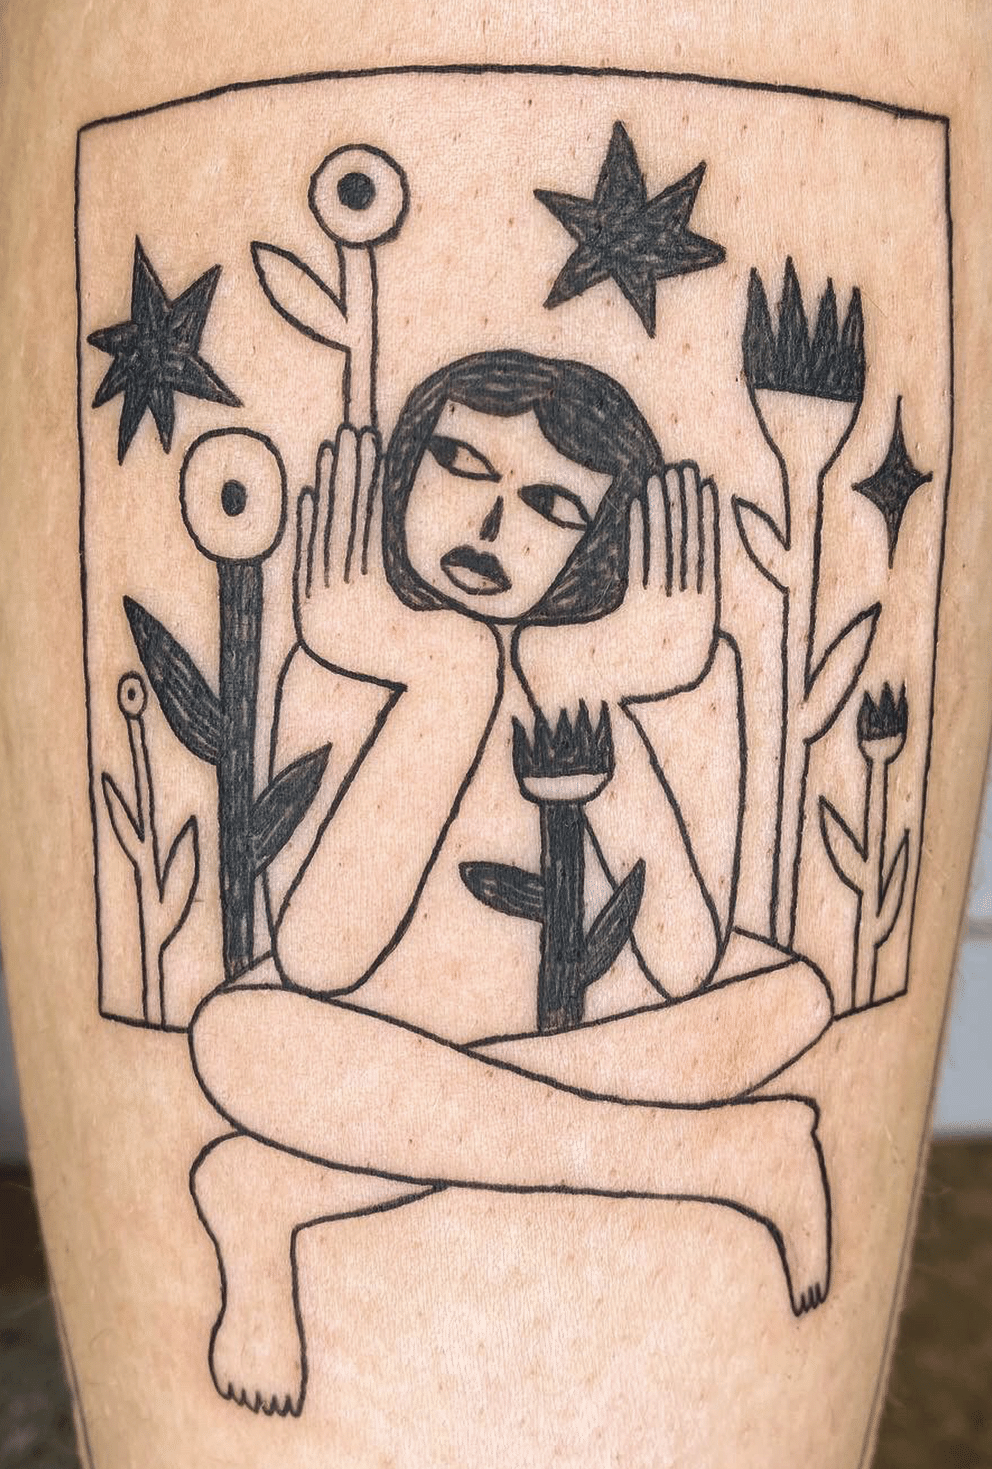 Keekee Kookoo, a Chilean in Berlin, has worked as a set designer and illustrator, but what she really loves is tattooing – and creating finely lined and personal works of art